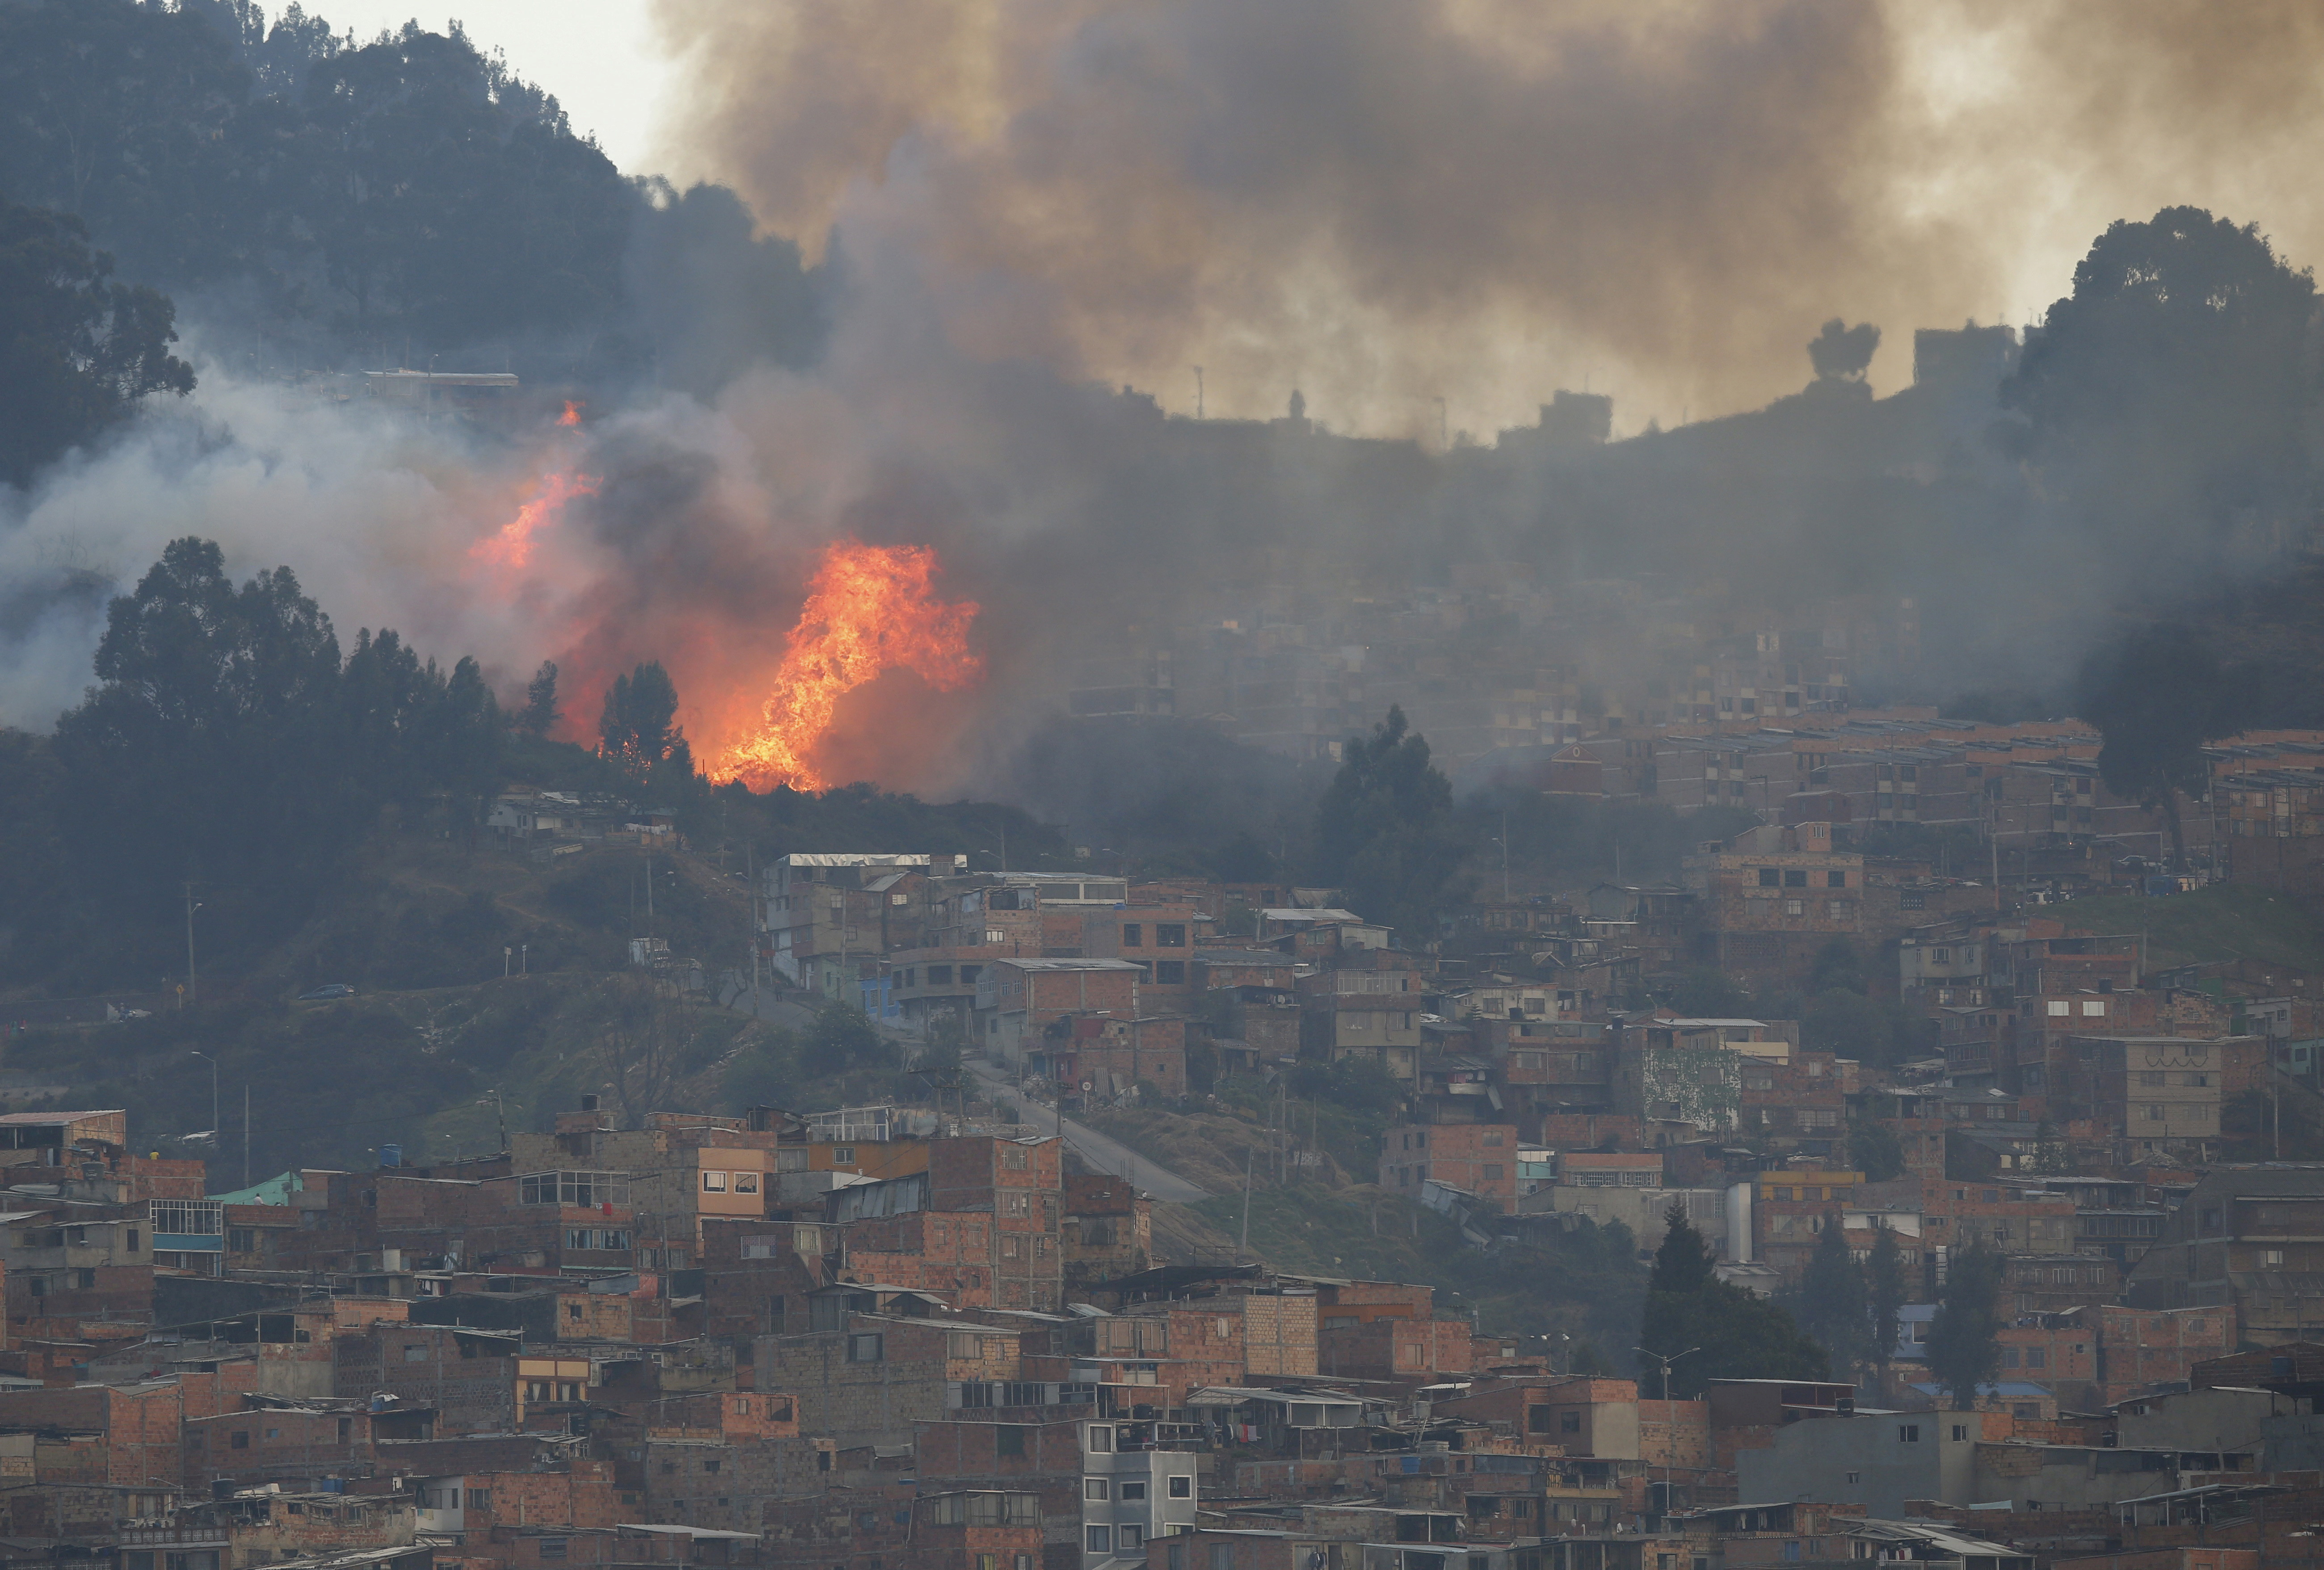 Smoke rises from a forest fire on a hill area, near neighborhoods on the south side of Bogota, Colombia.